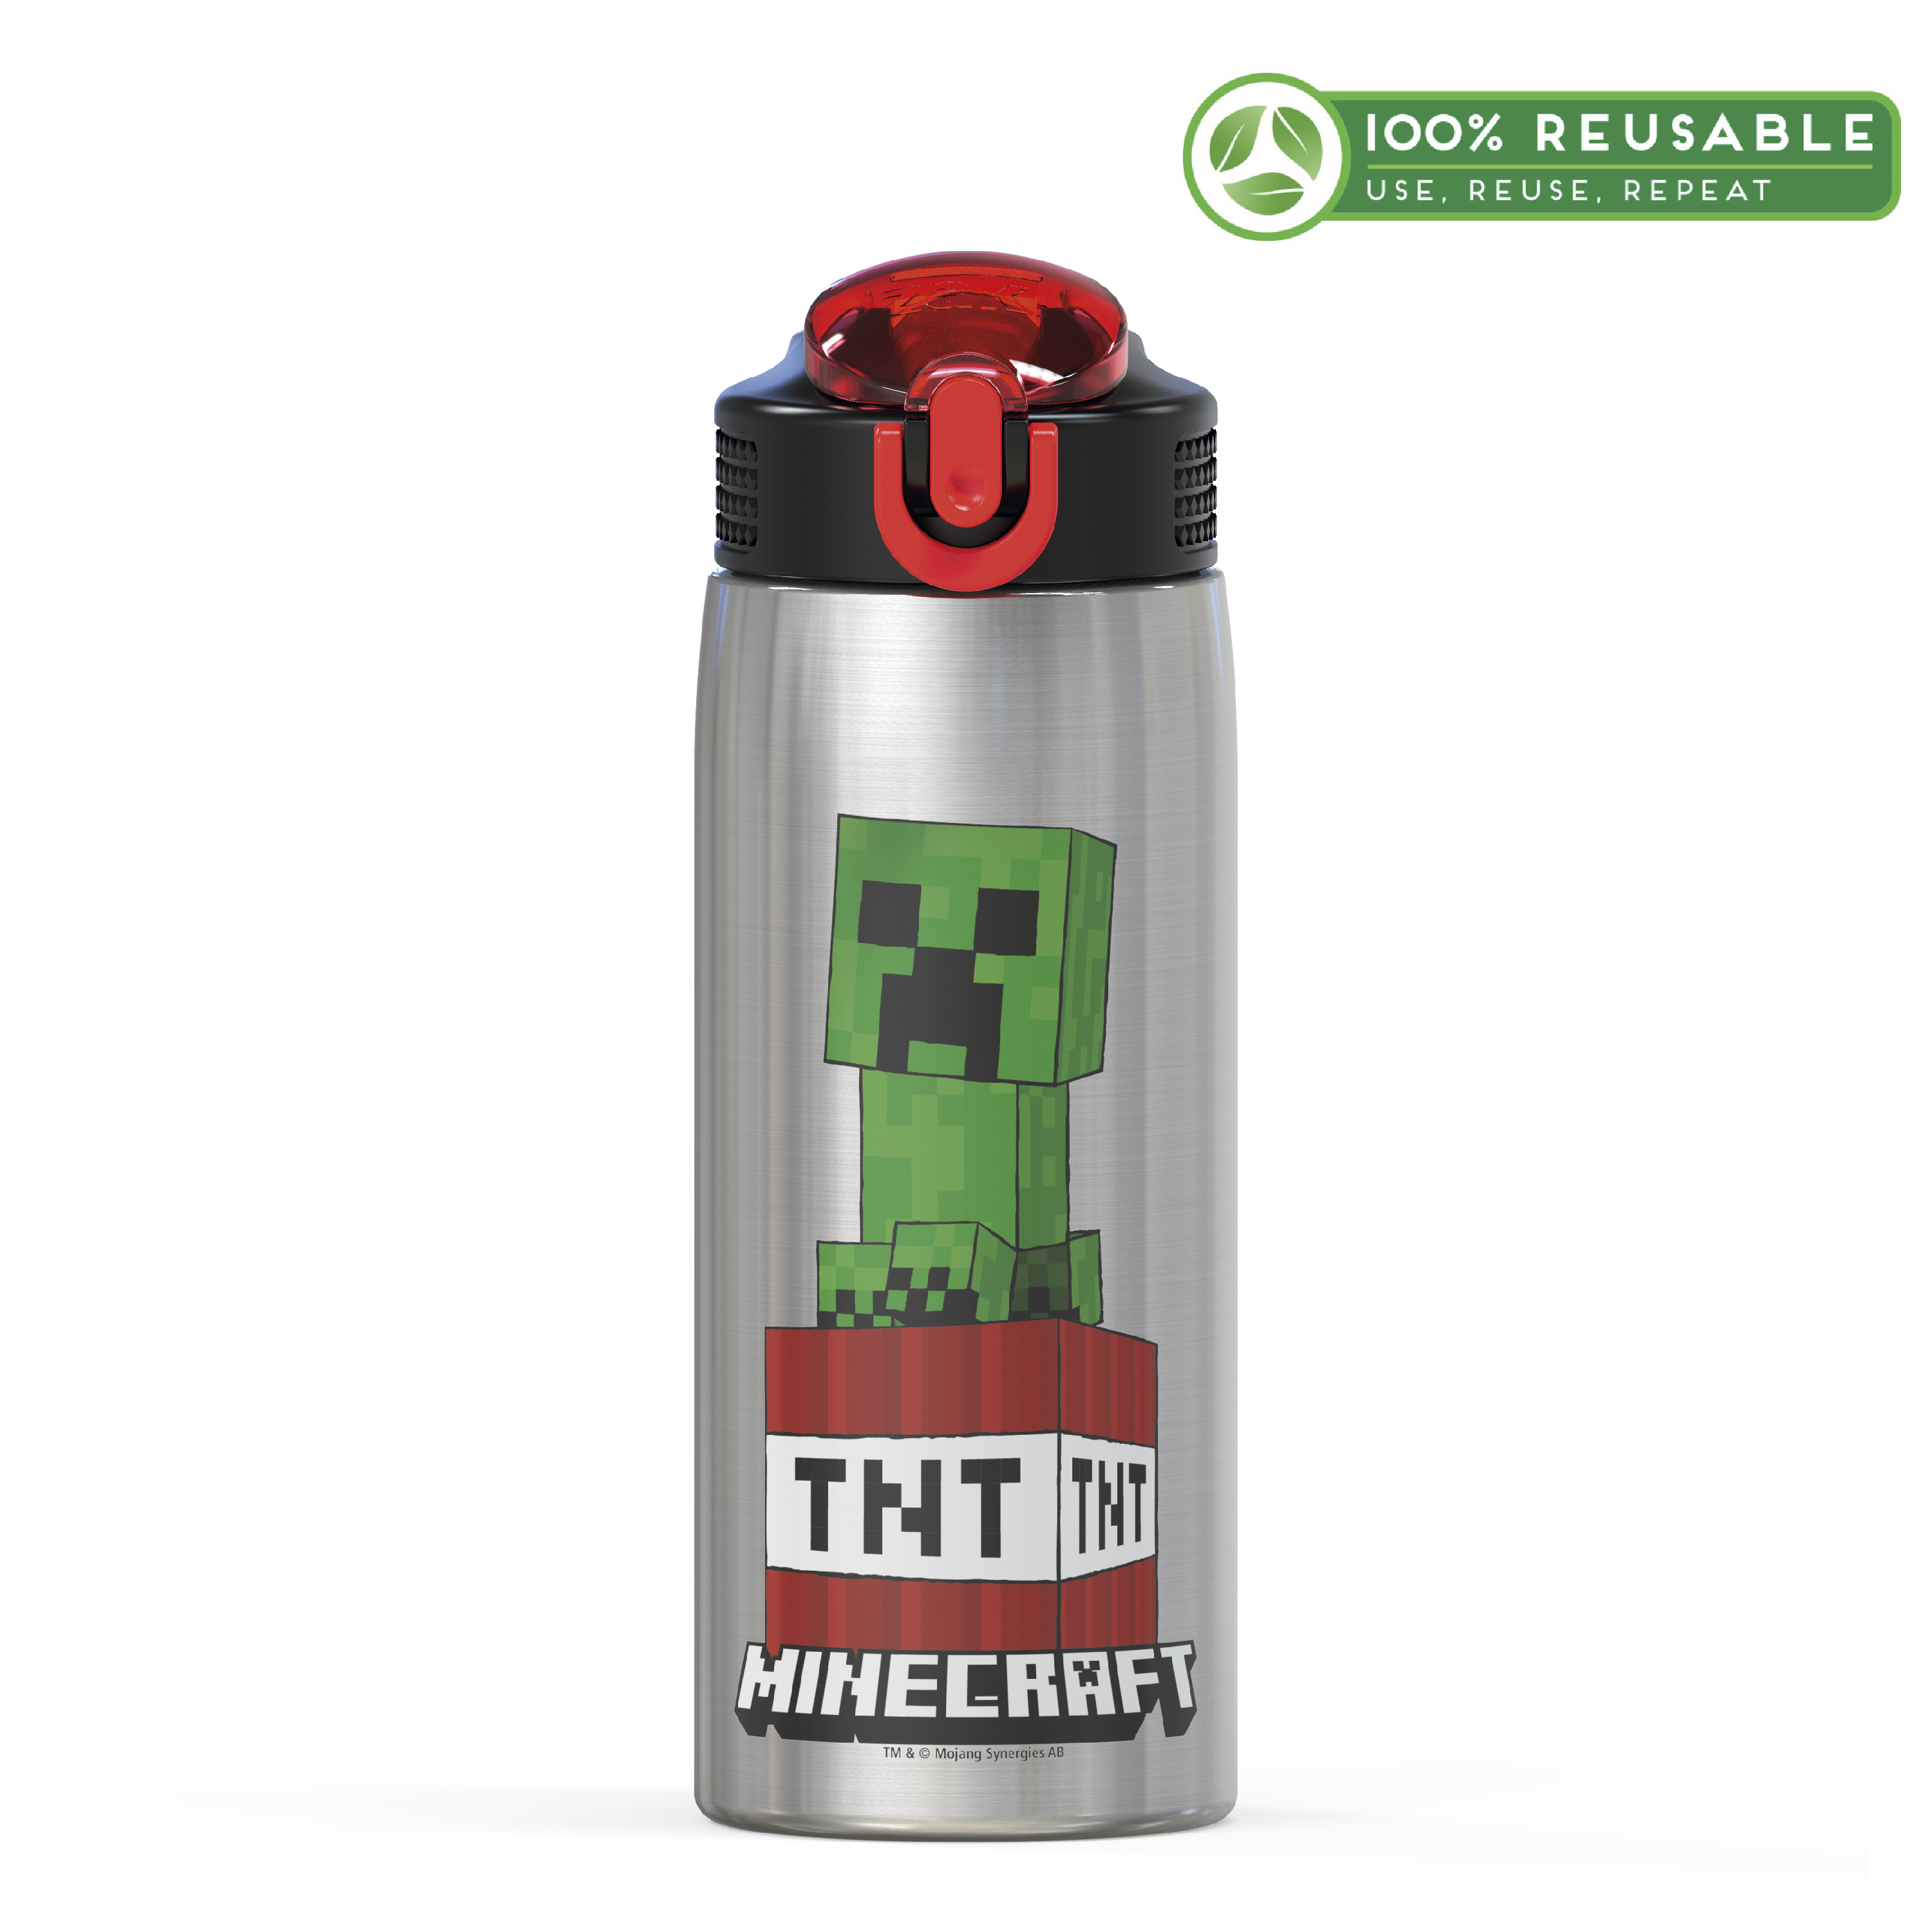 Minecraft 27 ounce Water Bottle, TNT and Creepers slideshow image 1